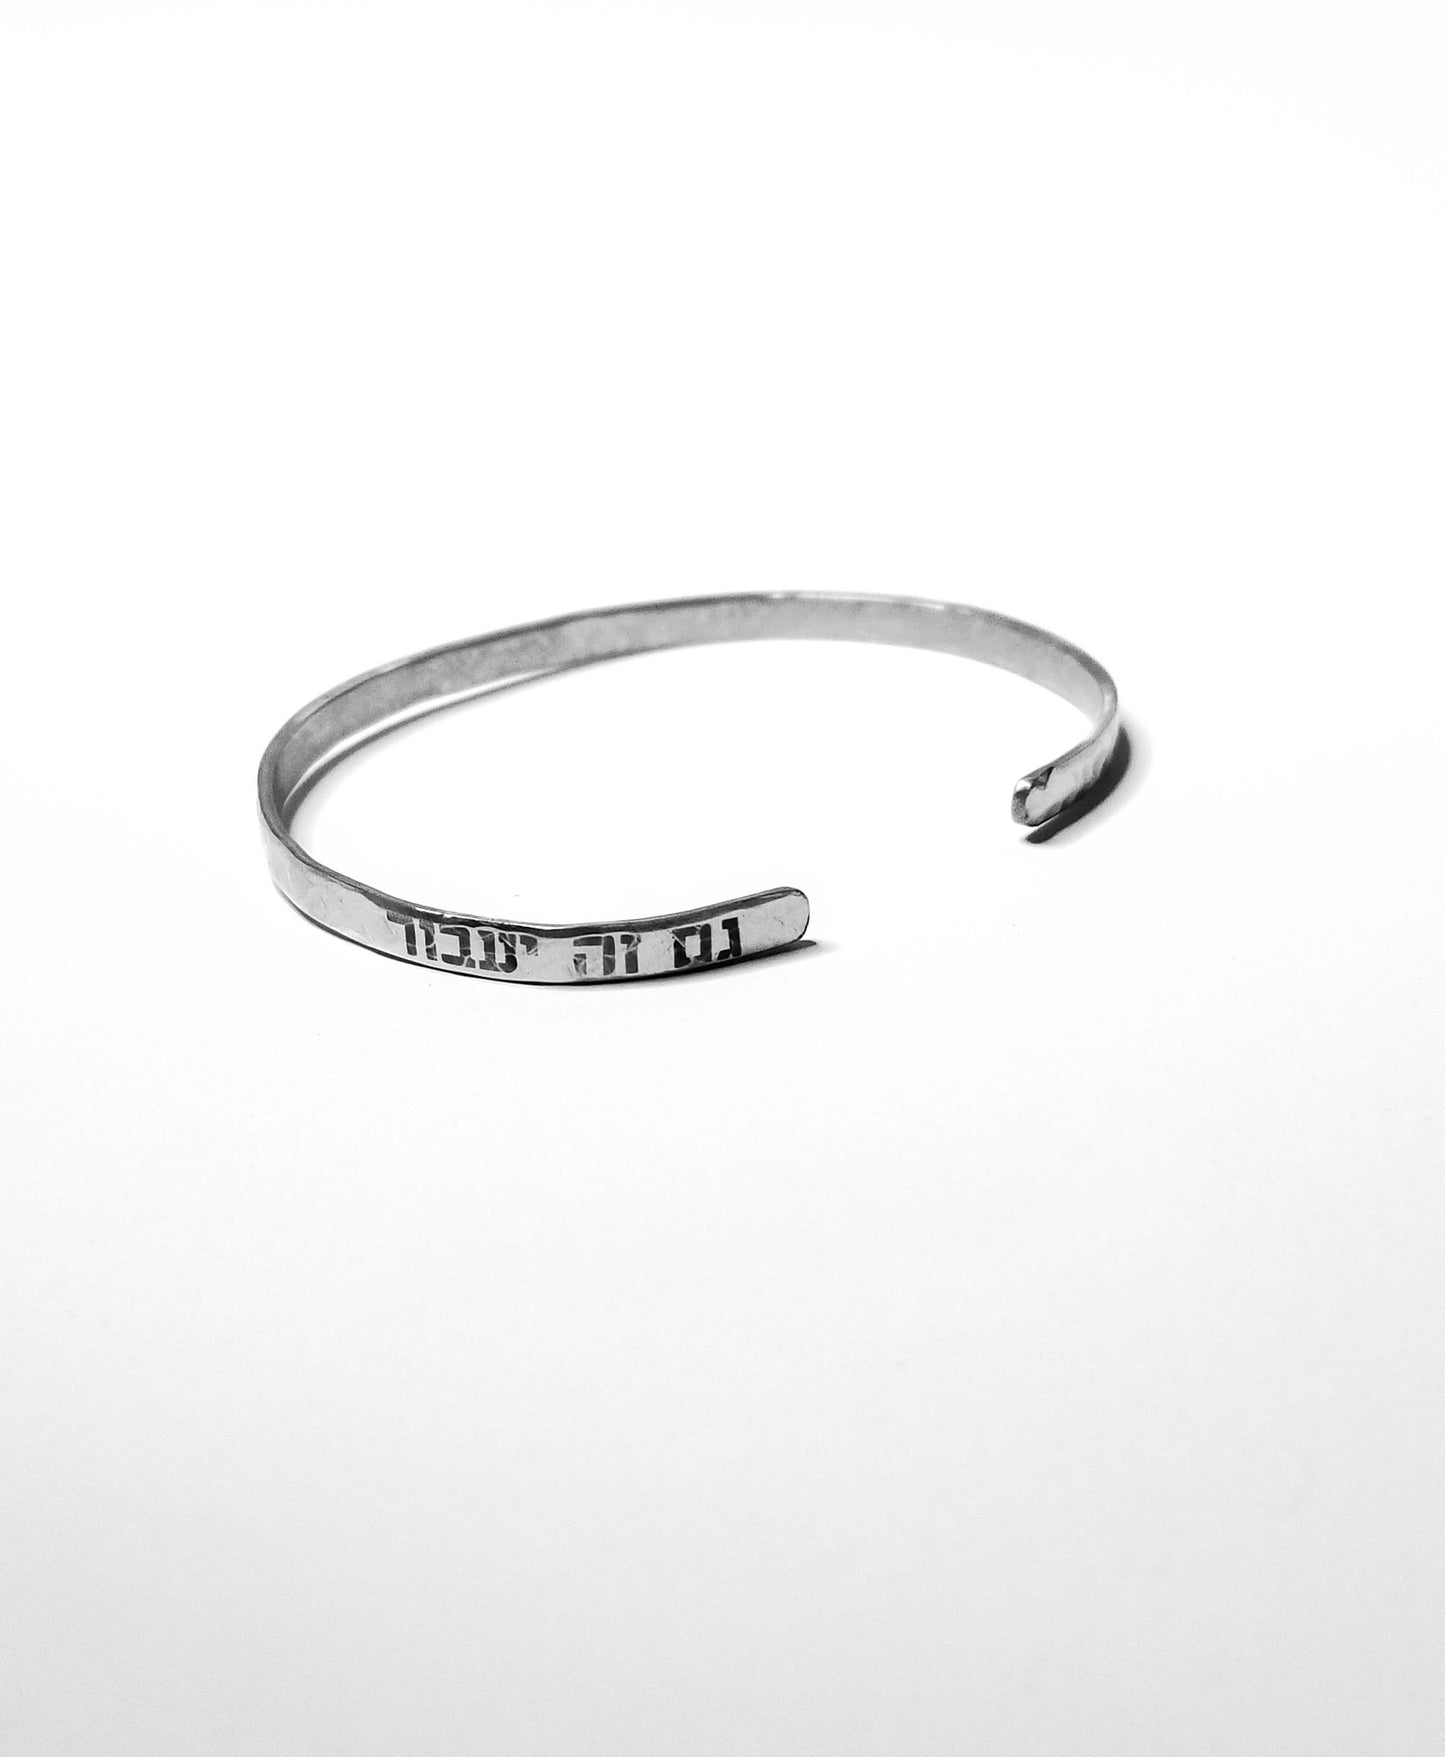 This too shell pass, Hebrew cuff bracelet, Gam Zeh Yaavor, Silver thin engraved bangle, encouragement gift, Am Israel Chai, Hebrew Quote